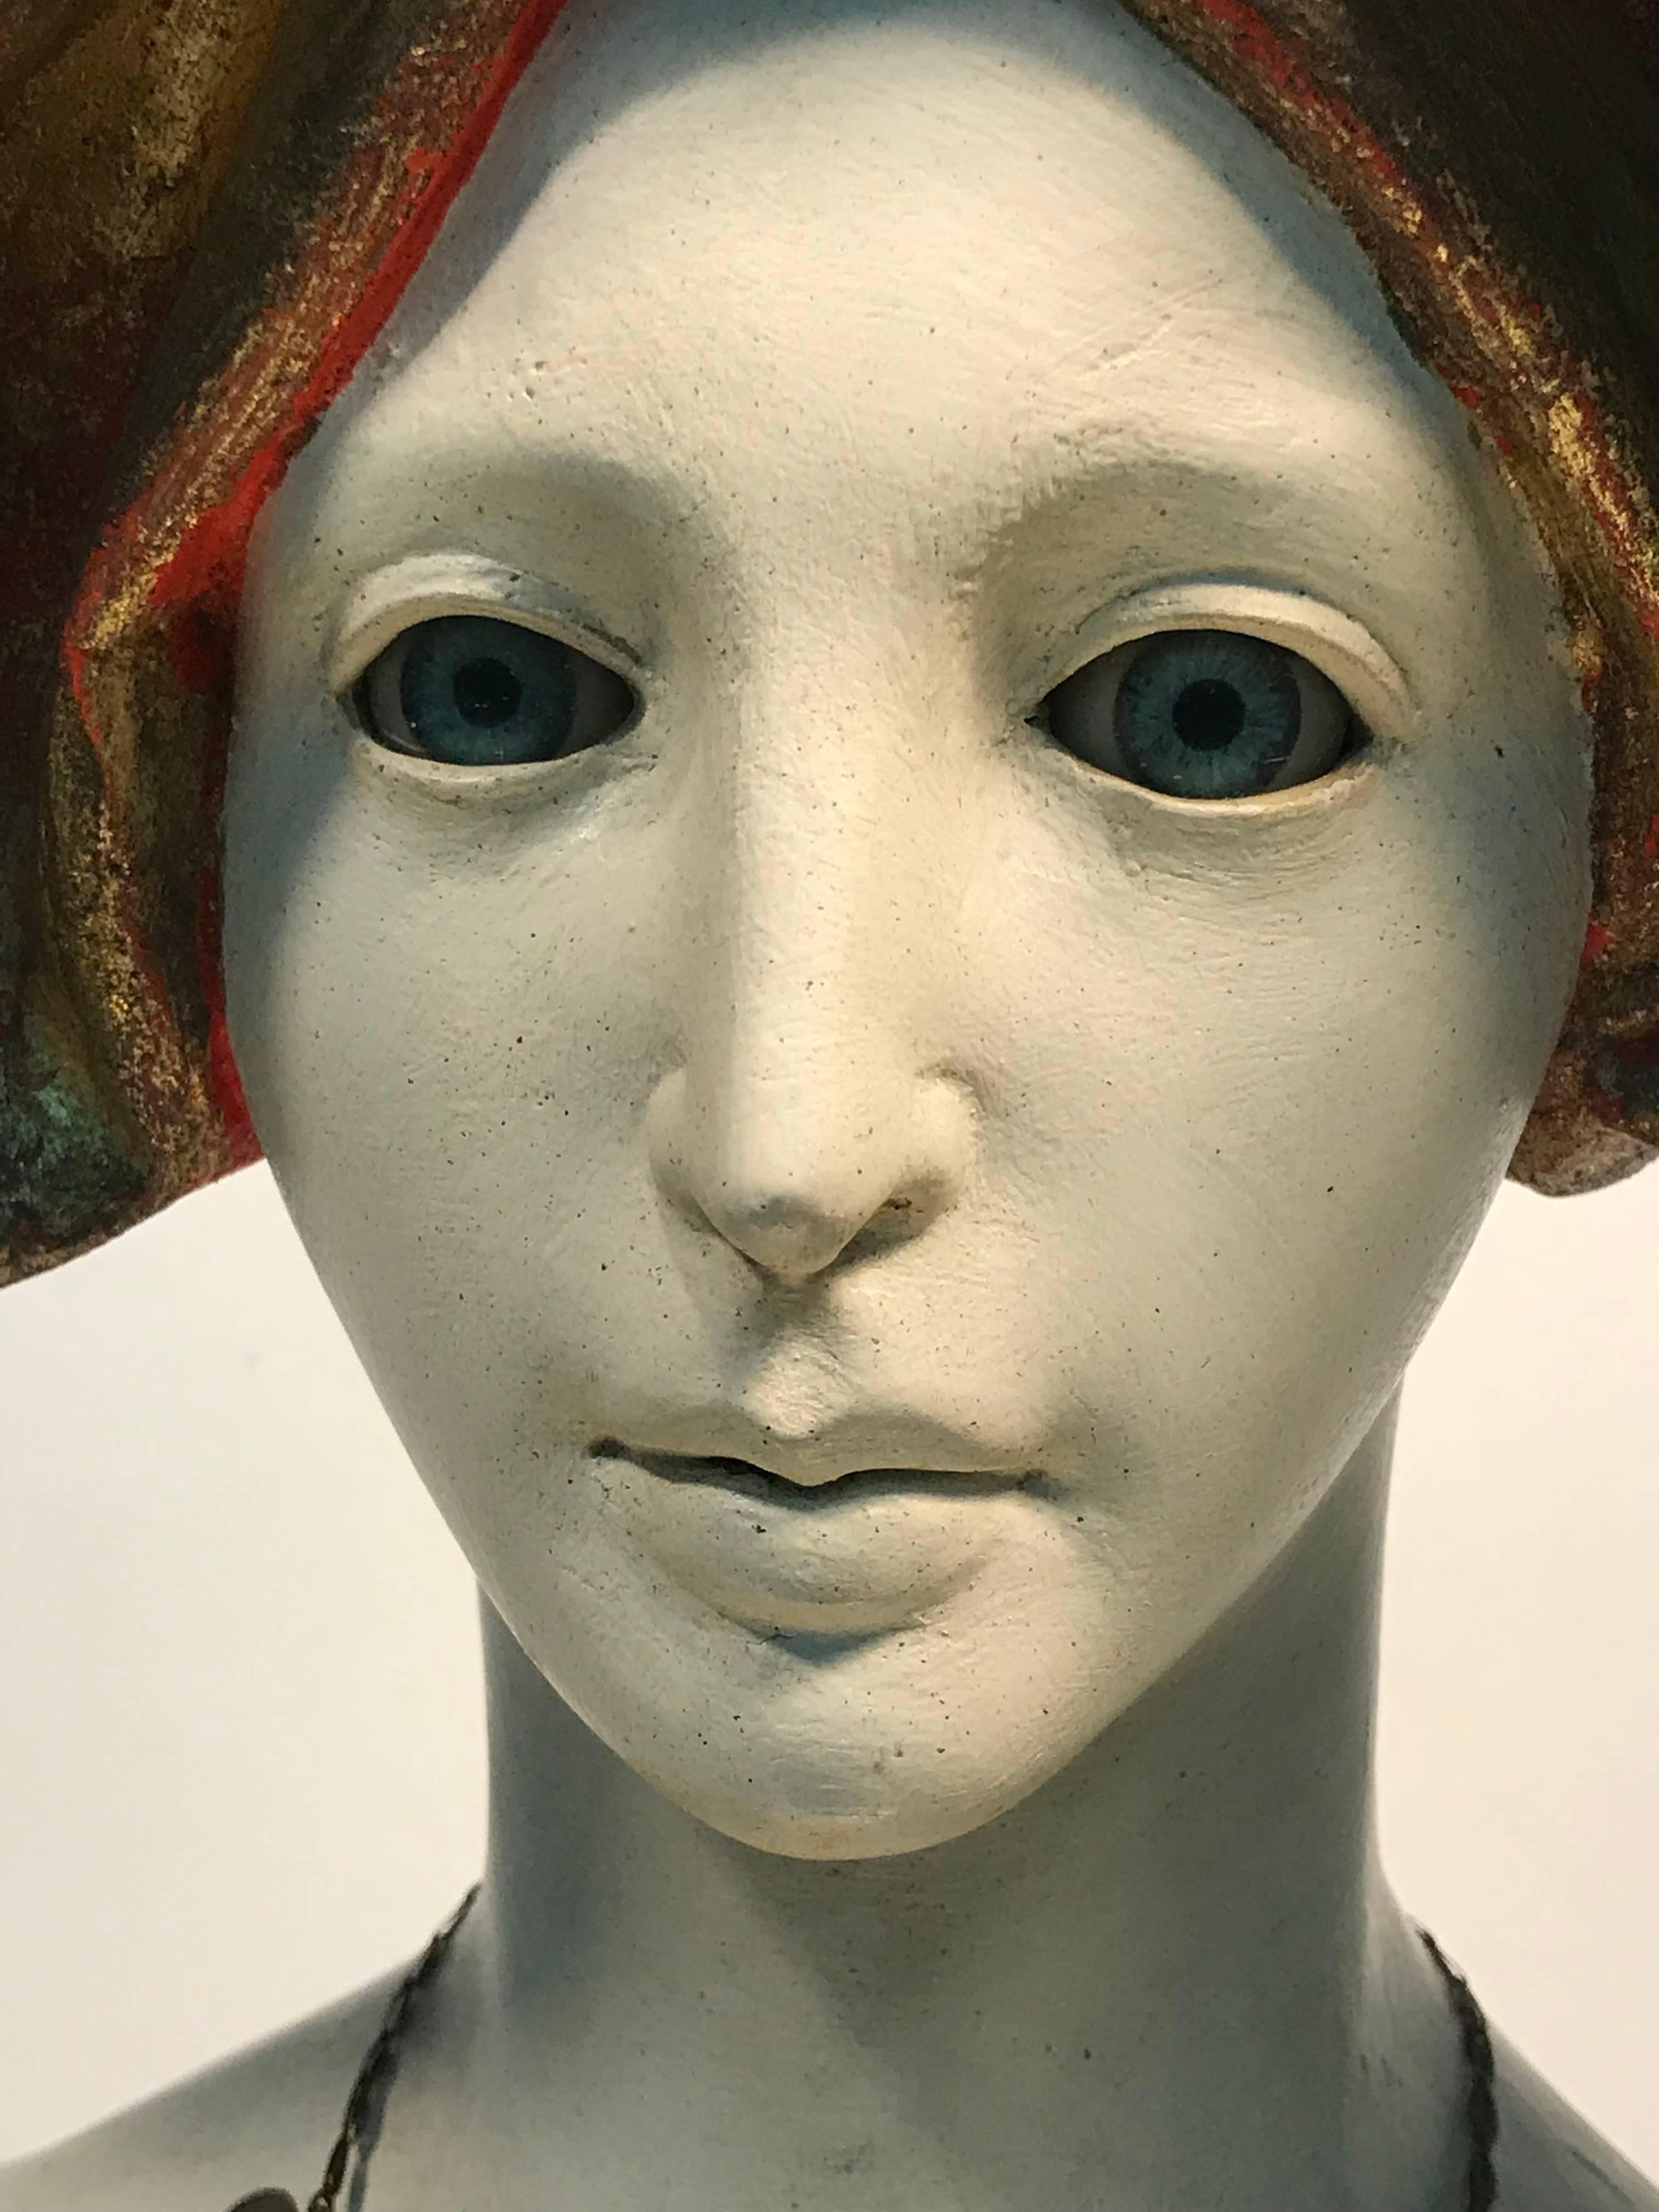 Female bust Art Nouveau style by Benvenvyl with glass eyes an plaster body
hand-painted, circa 1970.